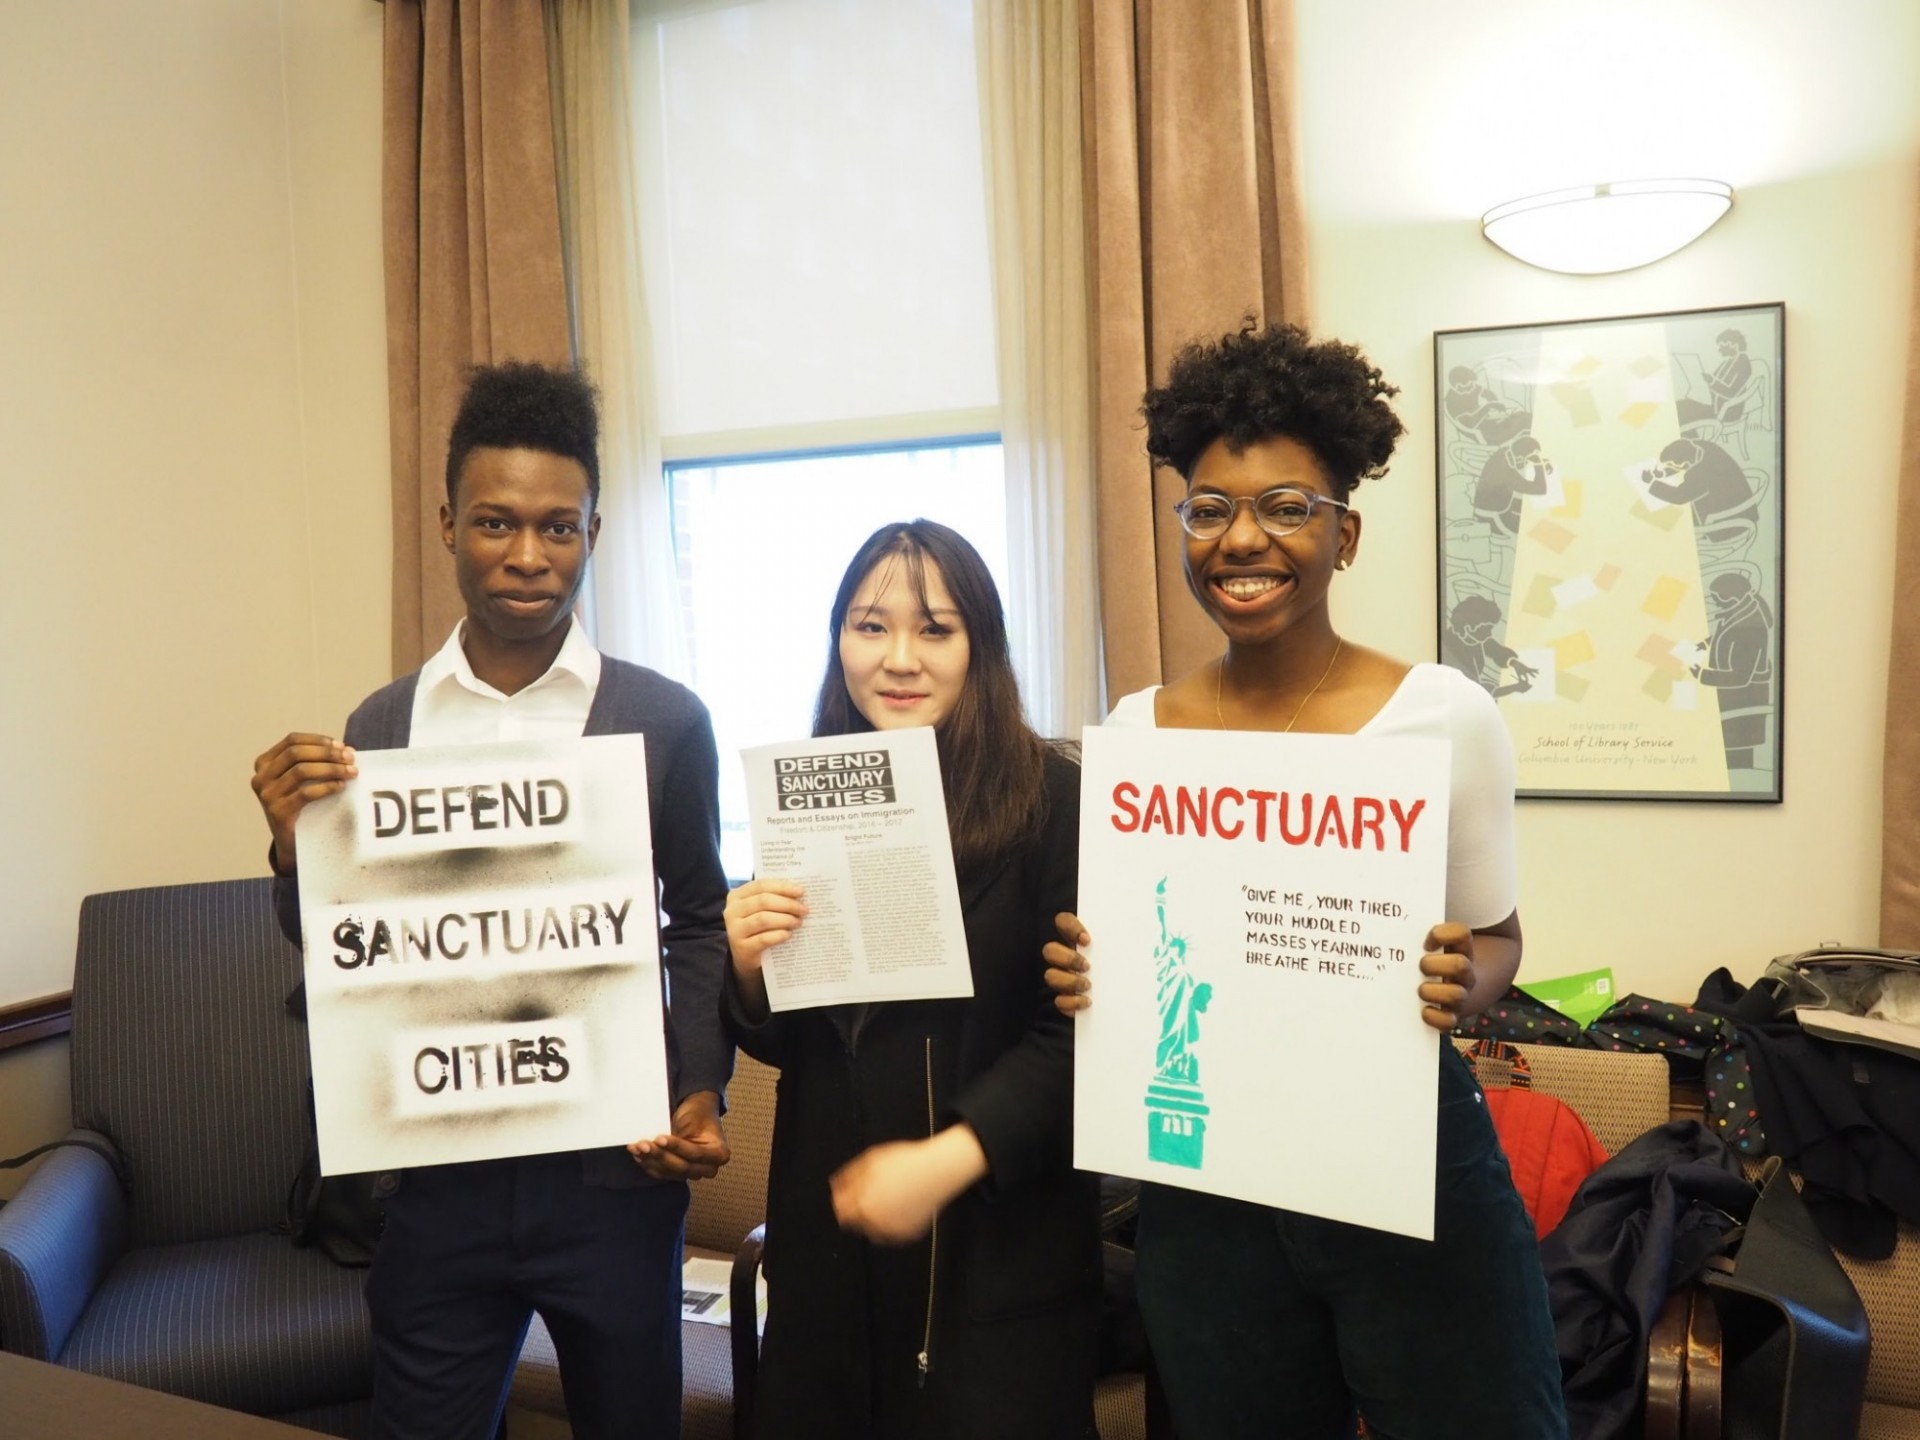 Chrisjen with his classmates holding up signs to defend sanctuary cities